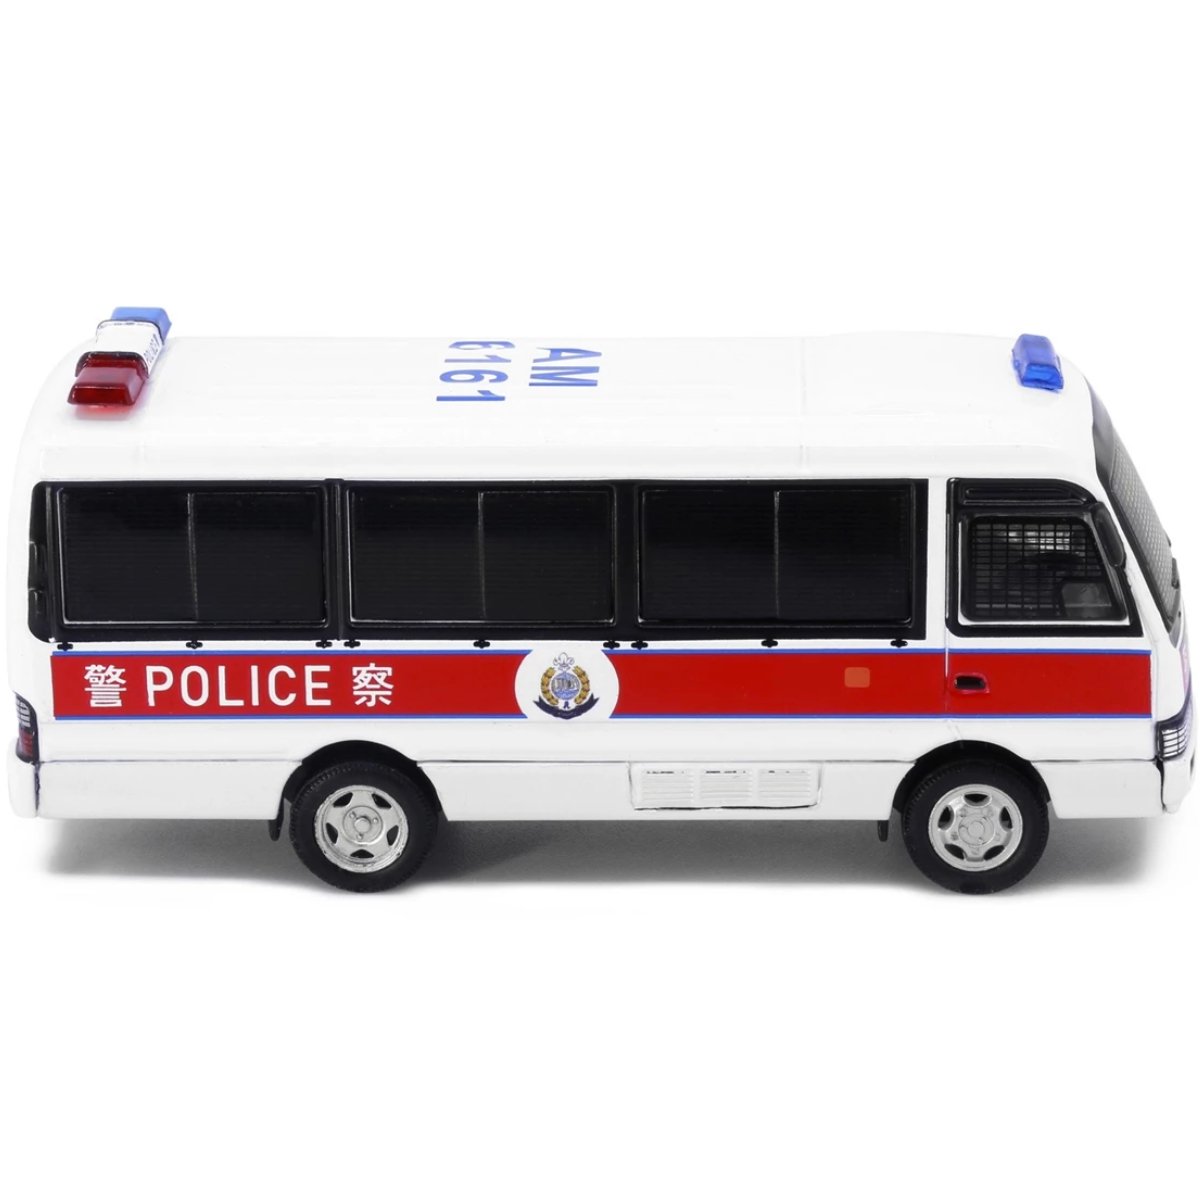 Tiny Models Toyota Coaster Police PTU - With Mesh Window Shields (1:76 Scale) - Phillips Hobbies